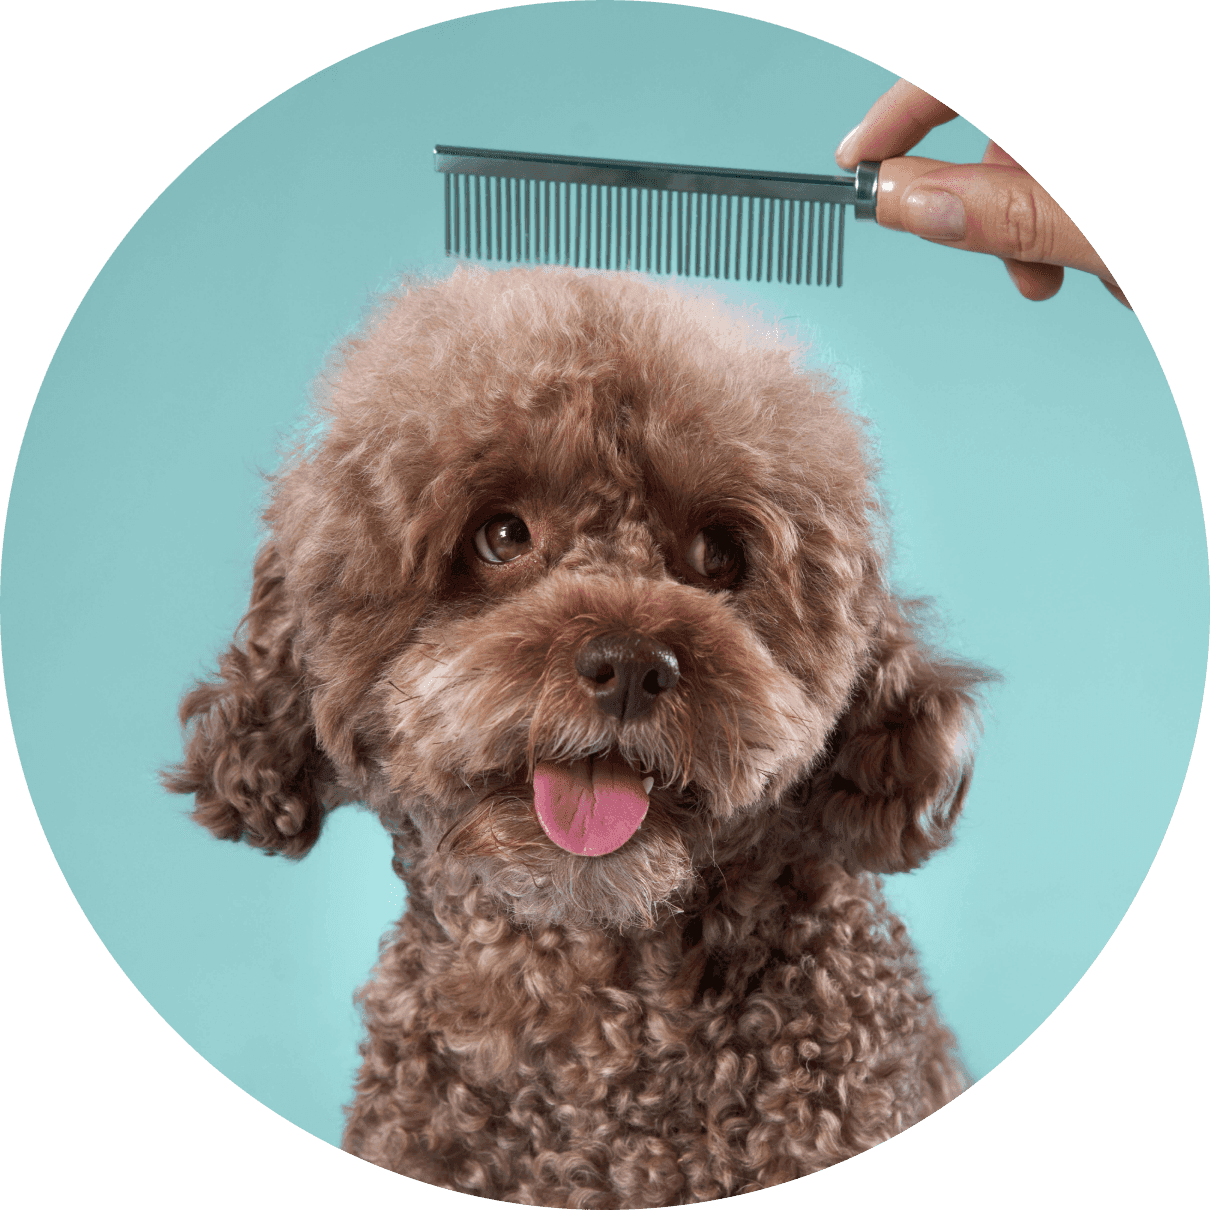 dog with comb